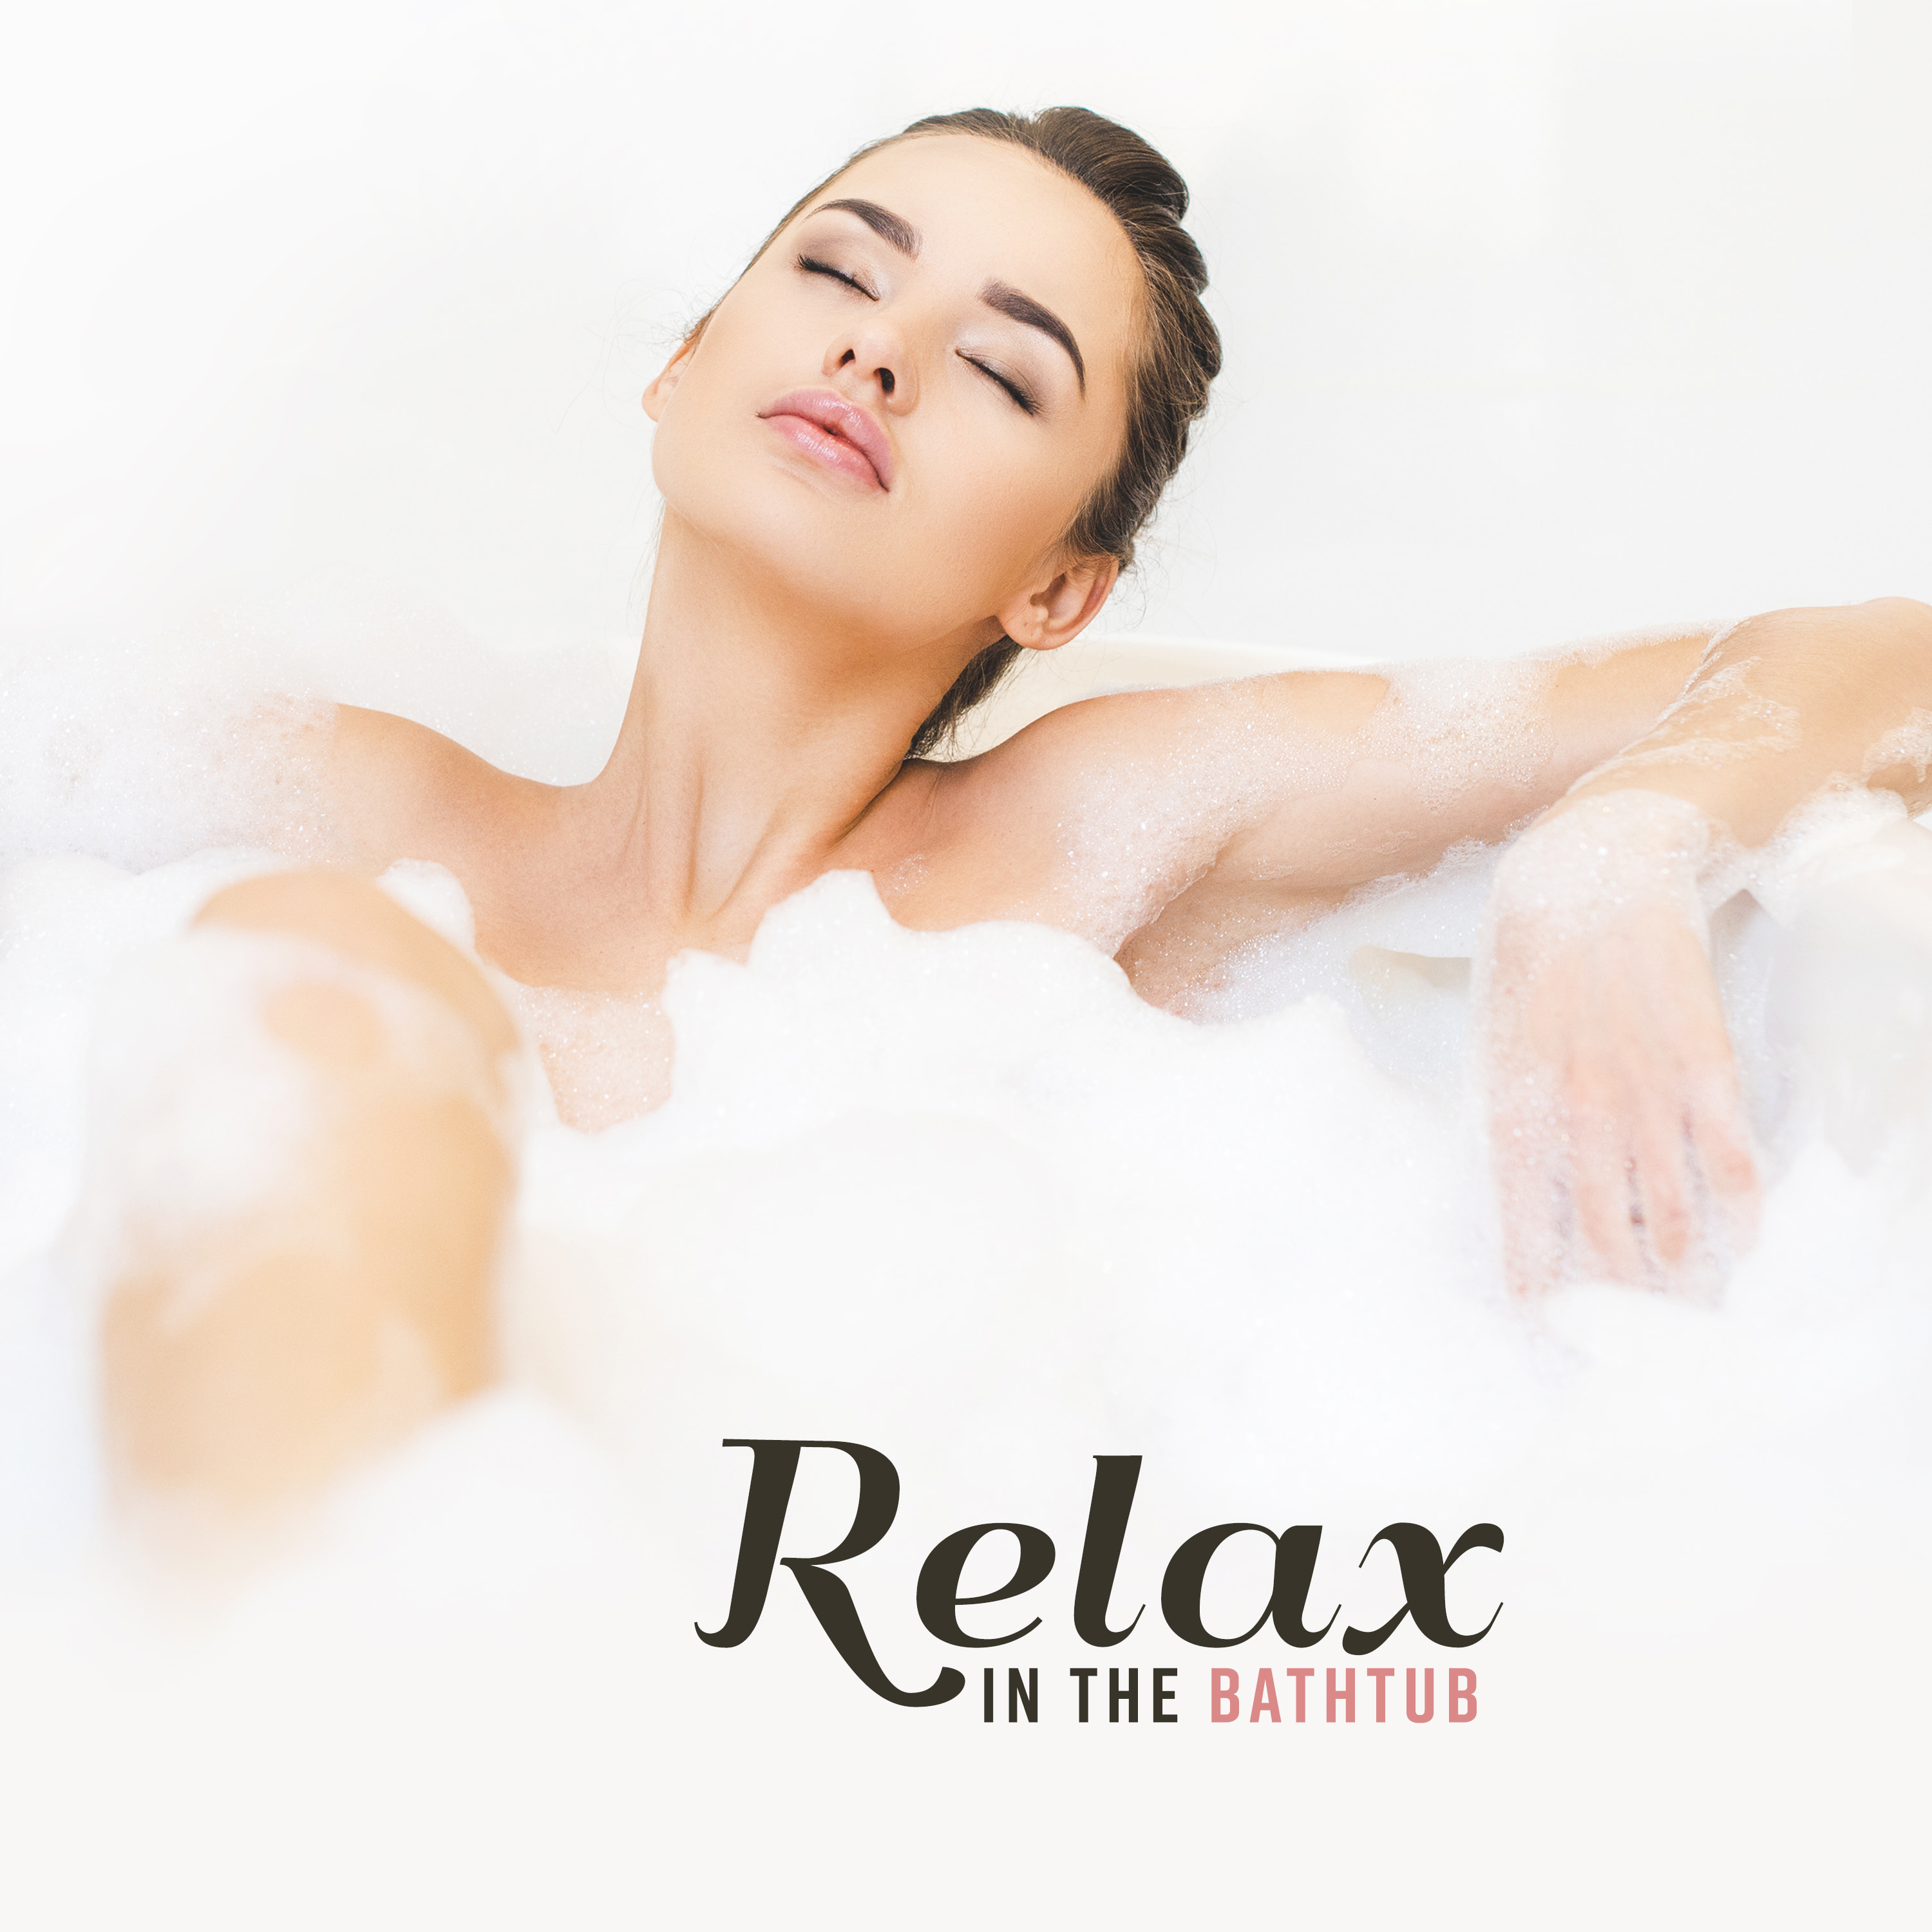 Relax in the Bathtub: Relaxing, Gentle and Soft Music for Bathing